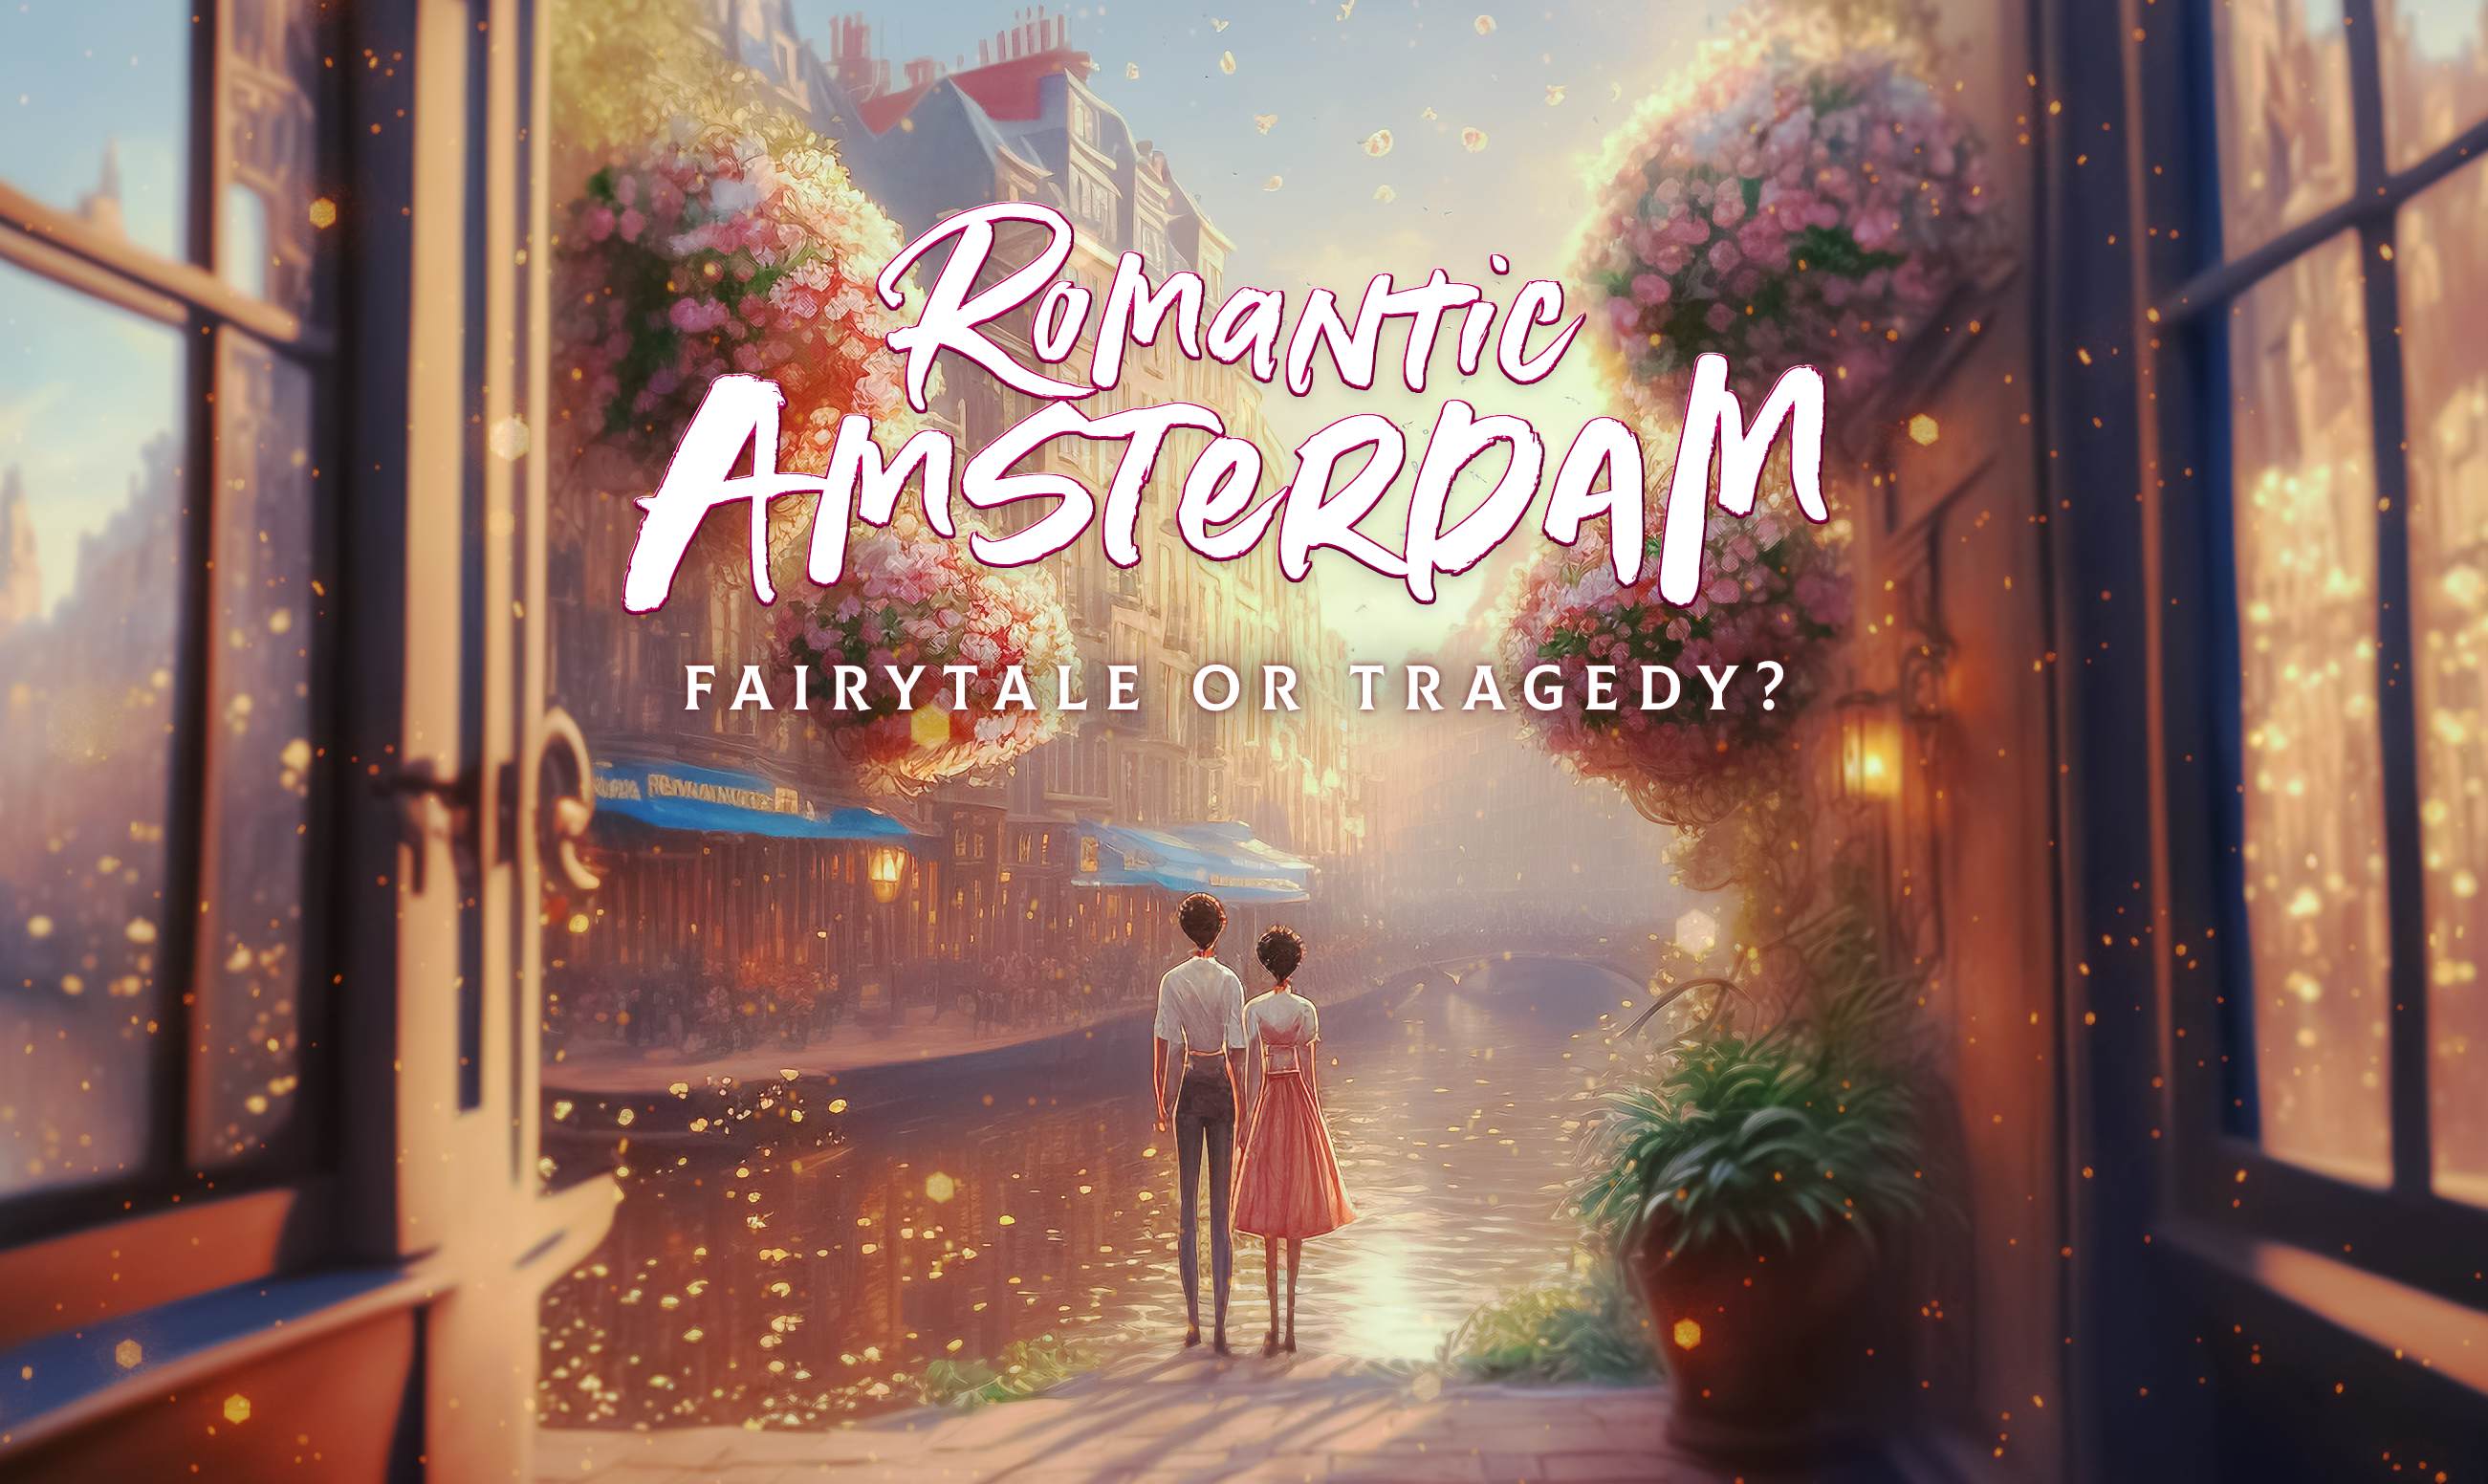 Romantic Highlights of Amsterdam: Fairytale or Tragedy? image